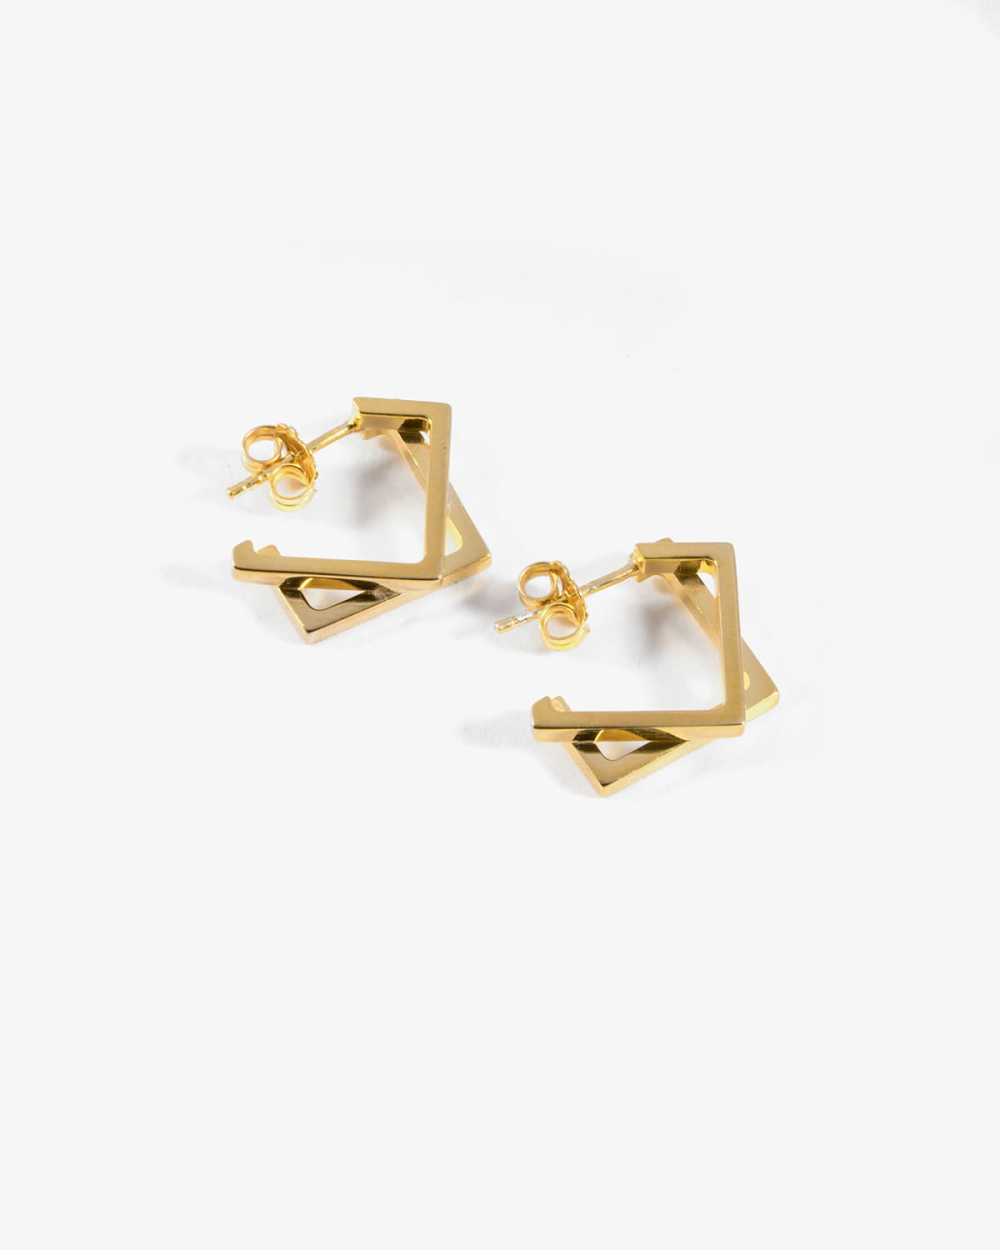 YELLOW GOLD SQUARE DOUBLE PLATE EARRINGS